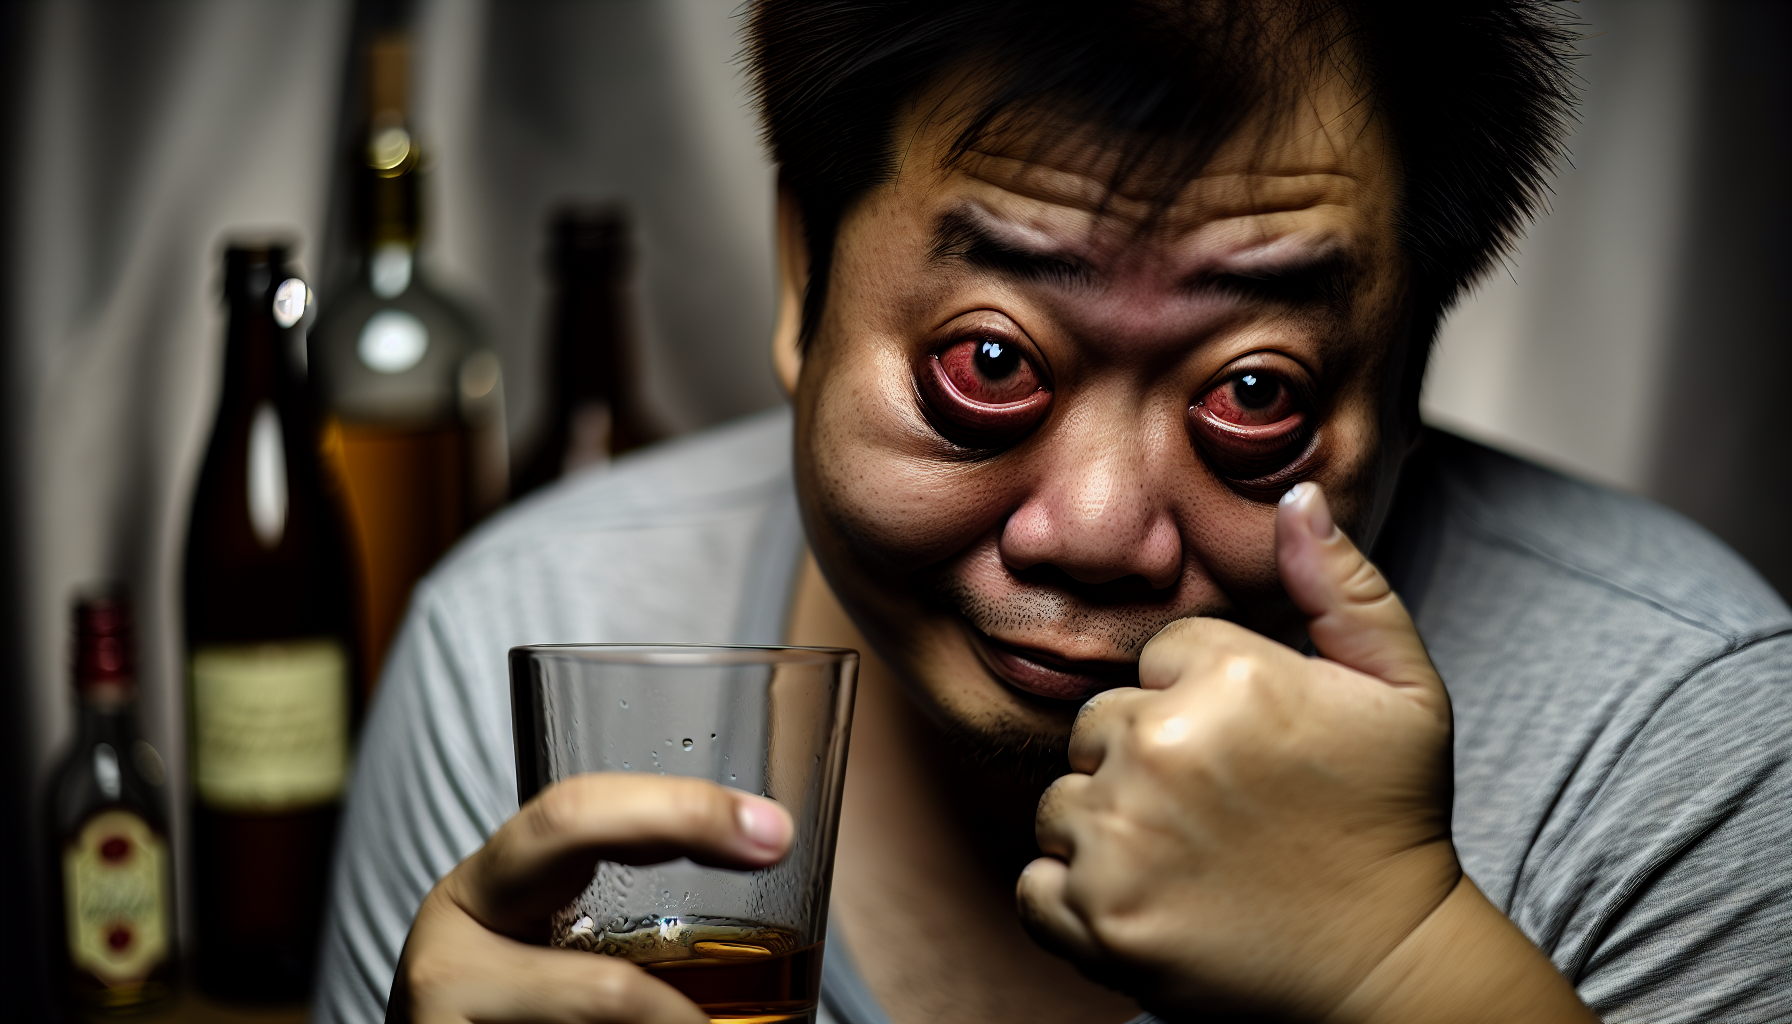 Photo of a person displaying signs of heavy drinking